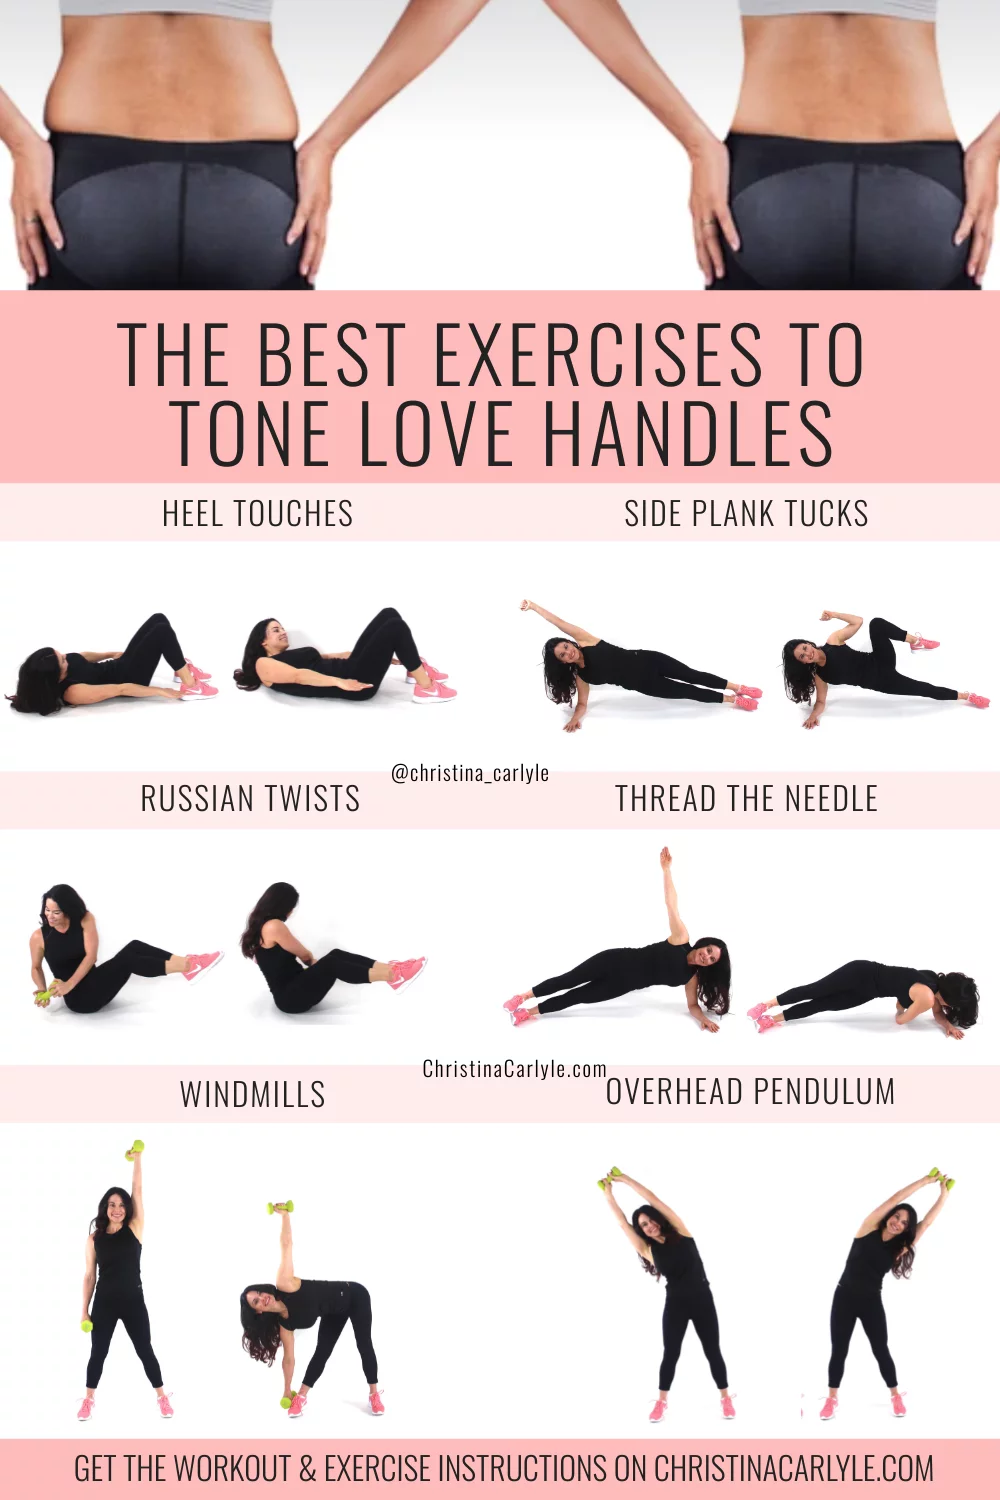 Love Handle Workout, Yoga Poses to tone the Sides